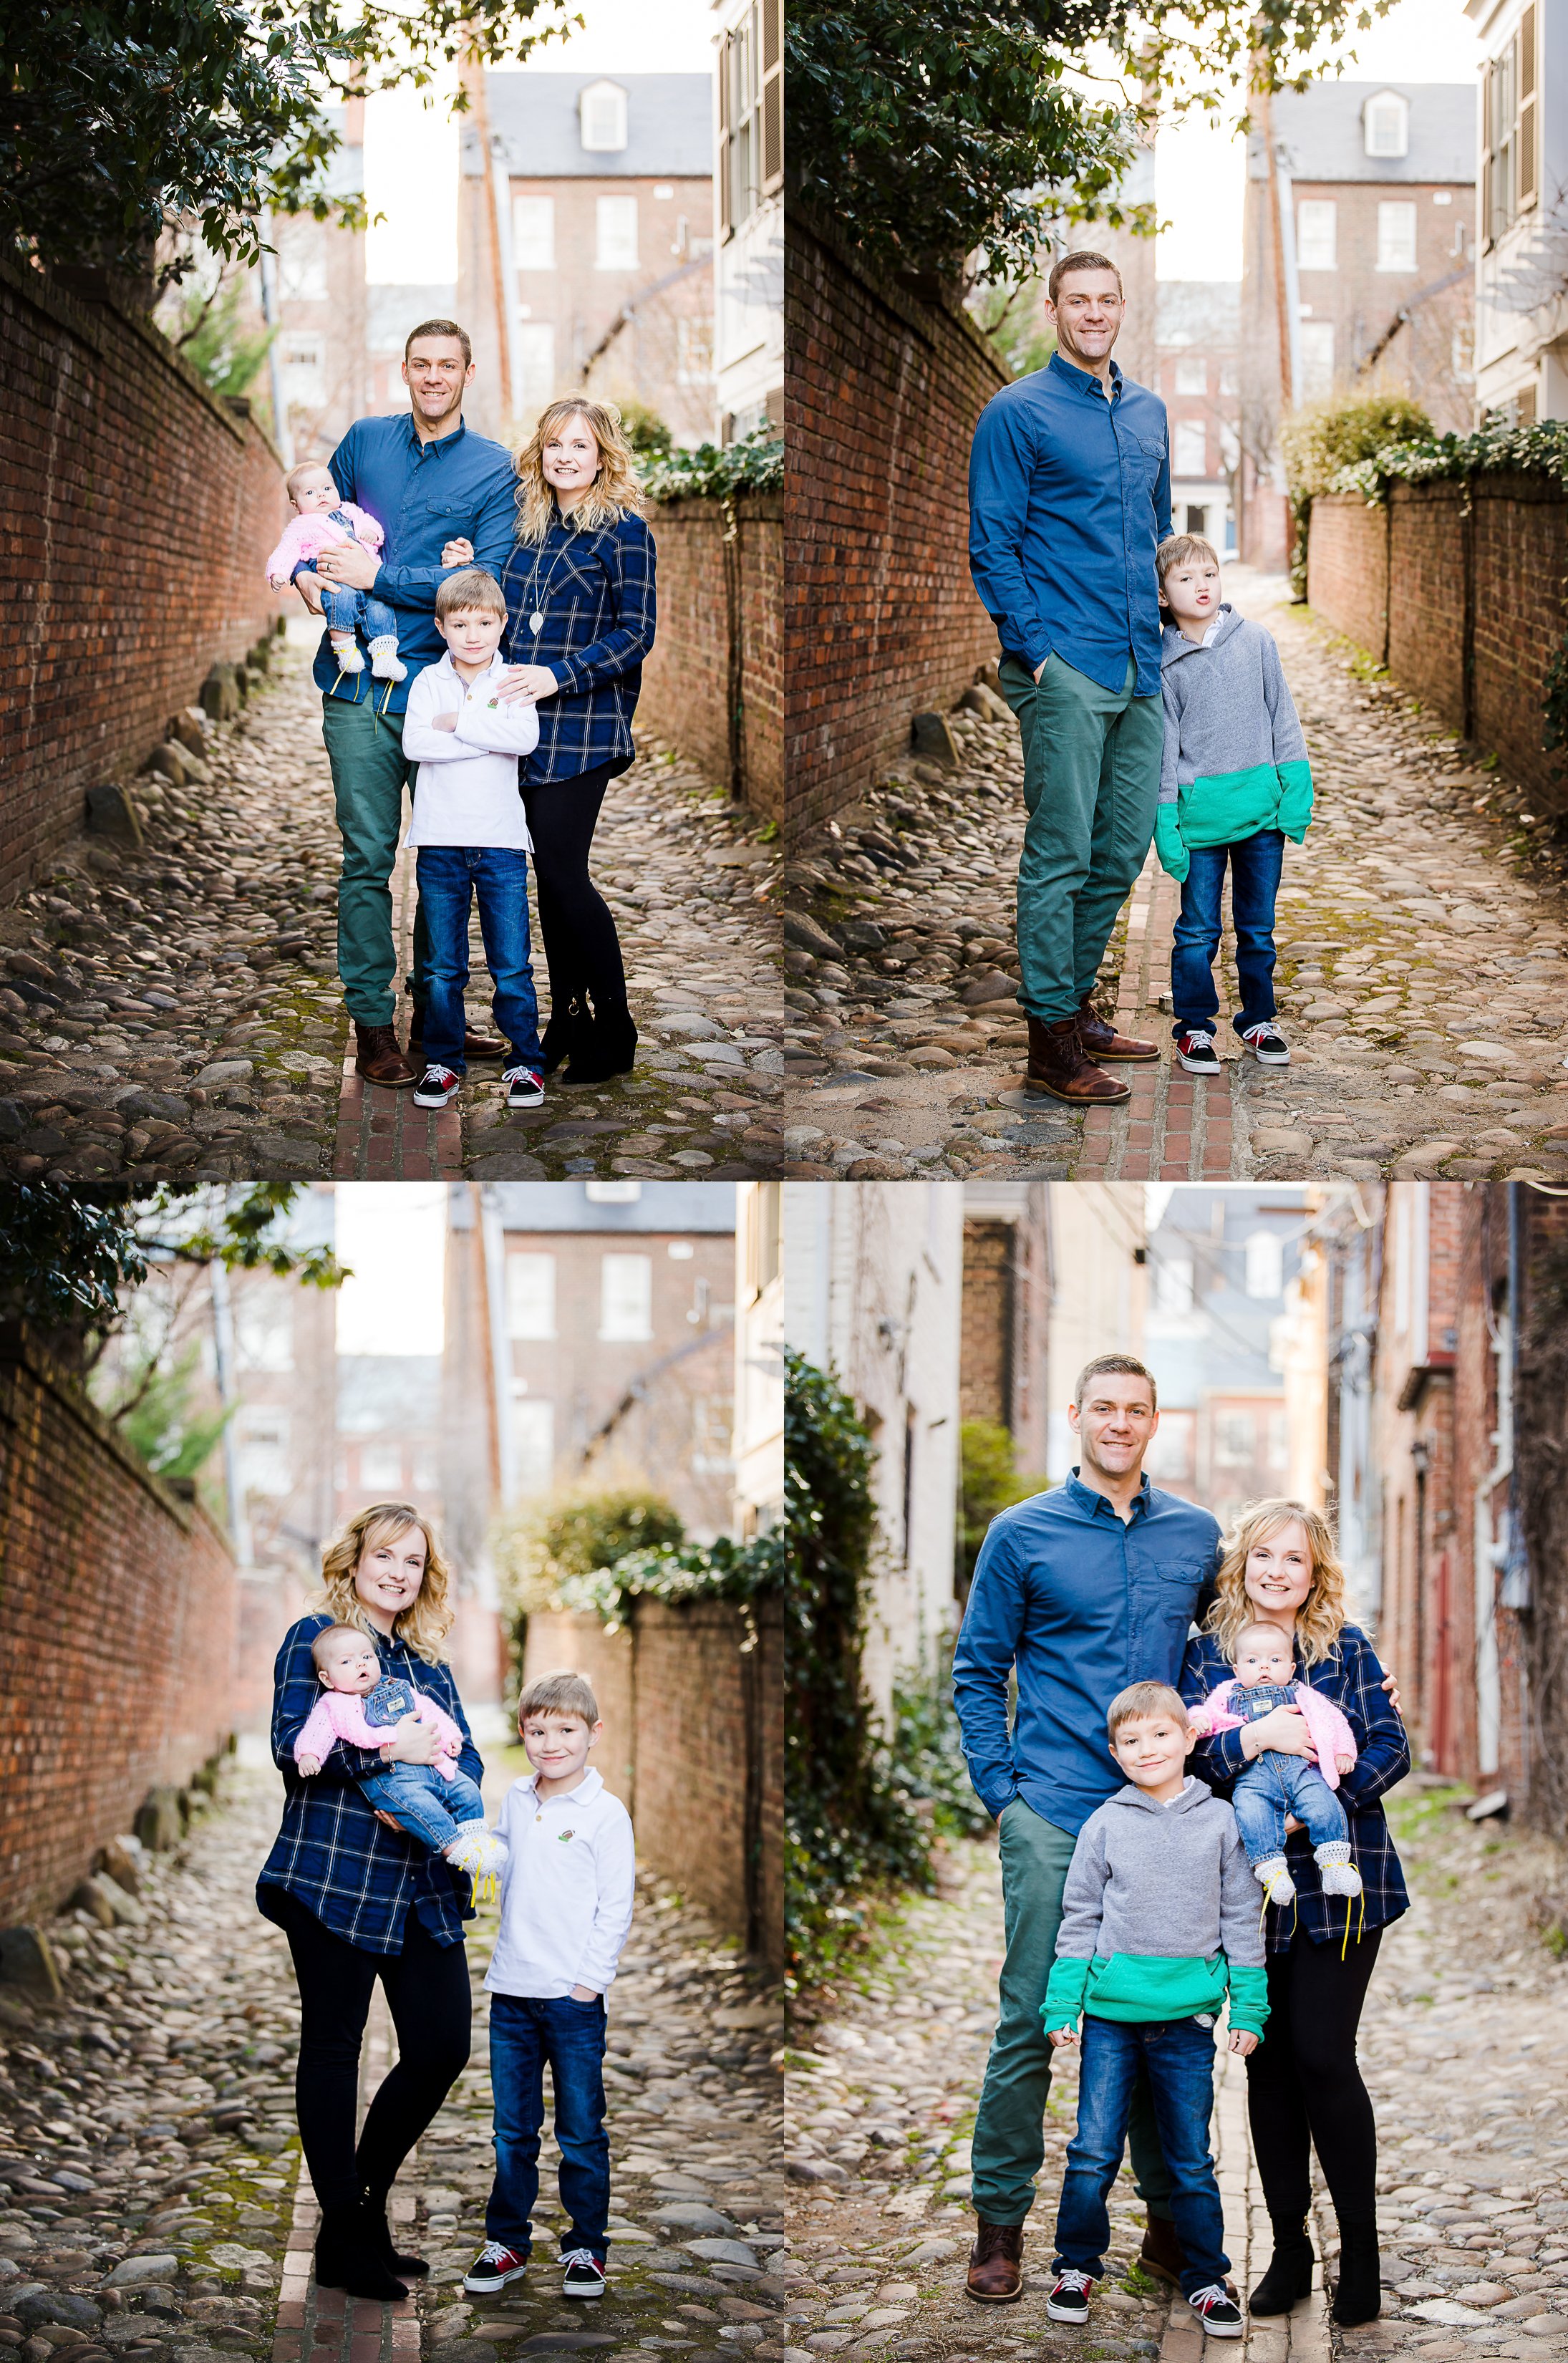 Family Photo Session in Old Town Alexandria VA